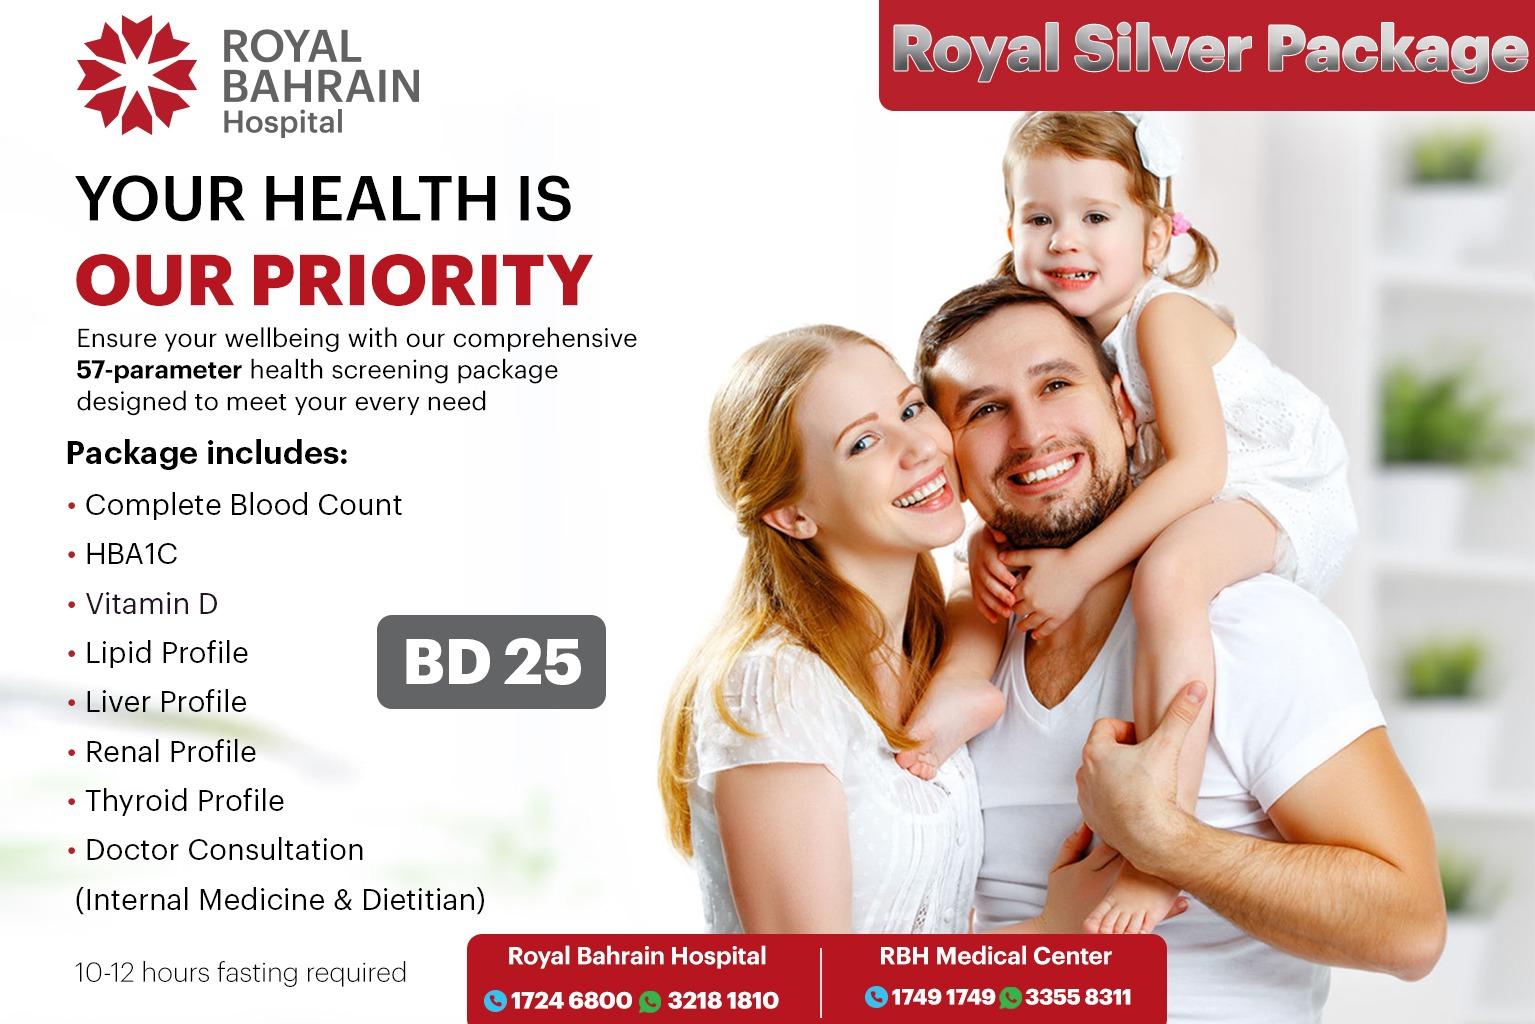 Royal Silver Package